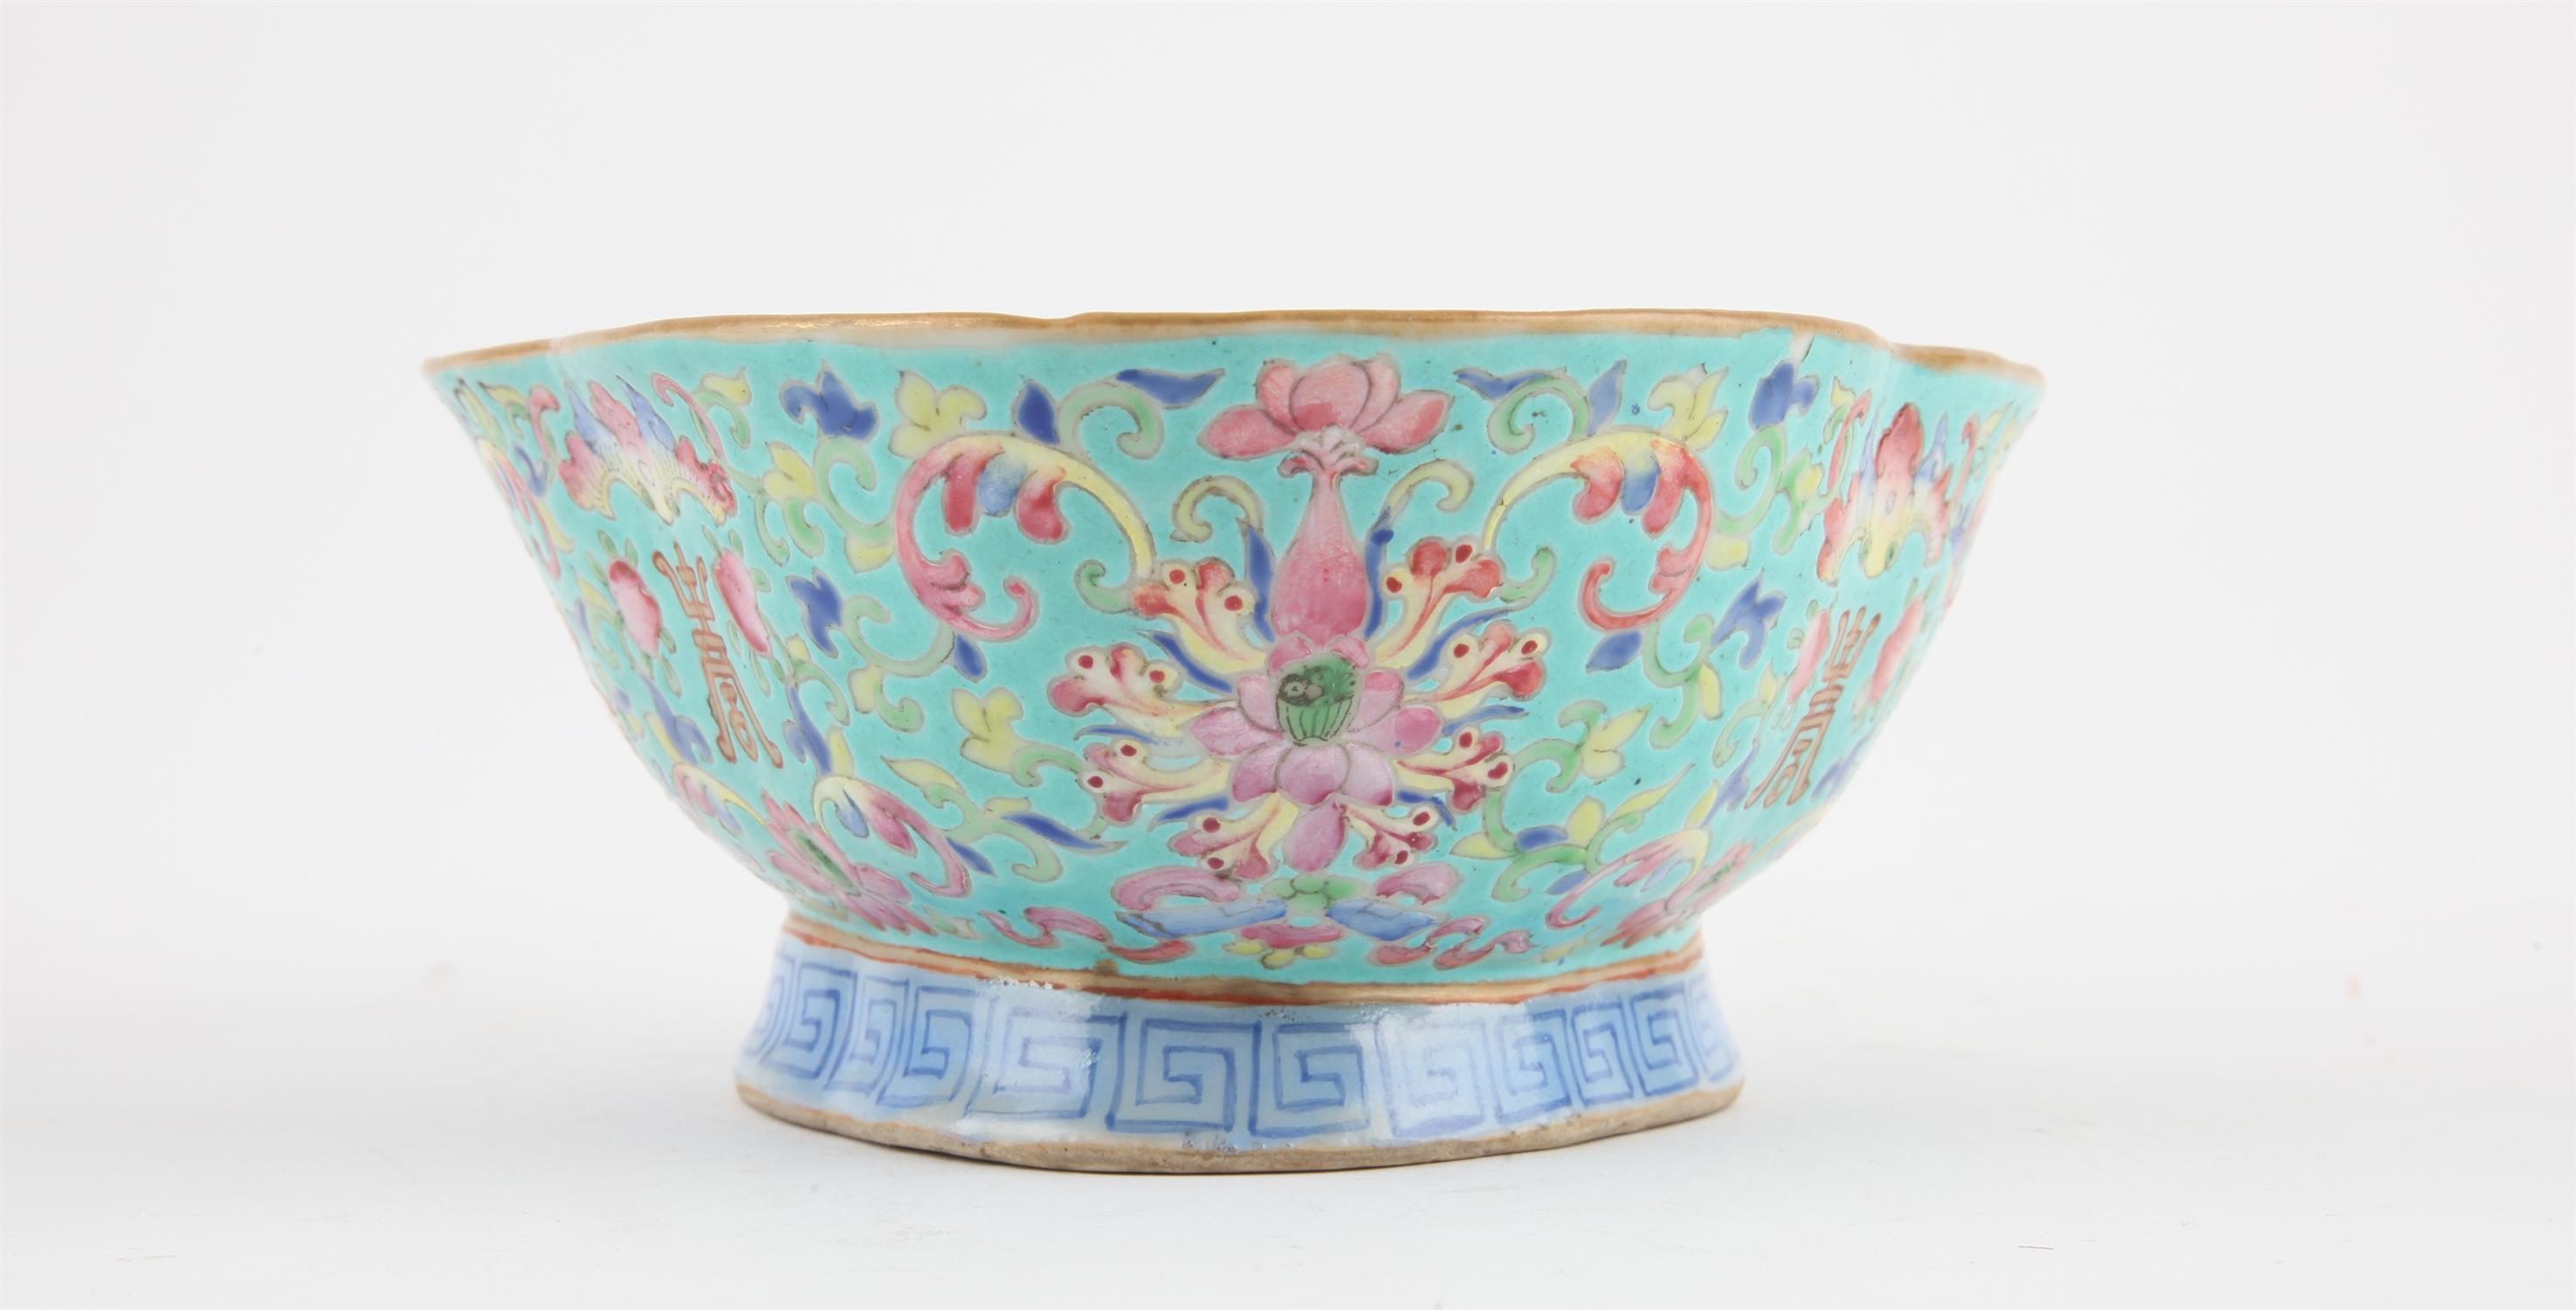 A Chinese Lobed Pedestal Bowl, Qing dynasty Painted with flowers , bats and the Shou longevity - Image 5 of 8